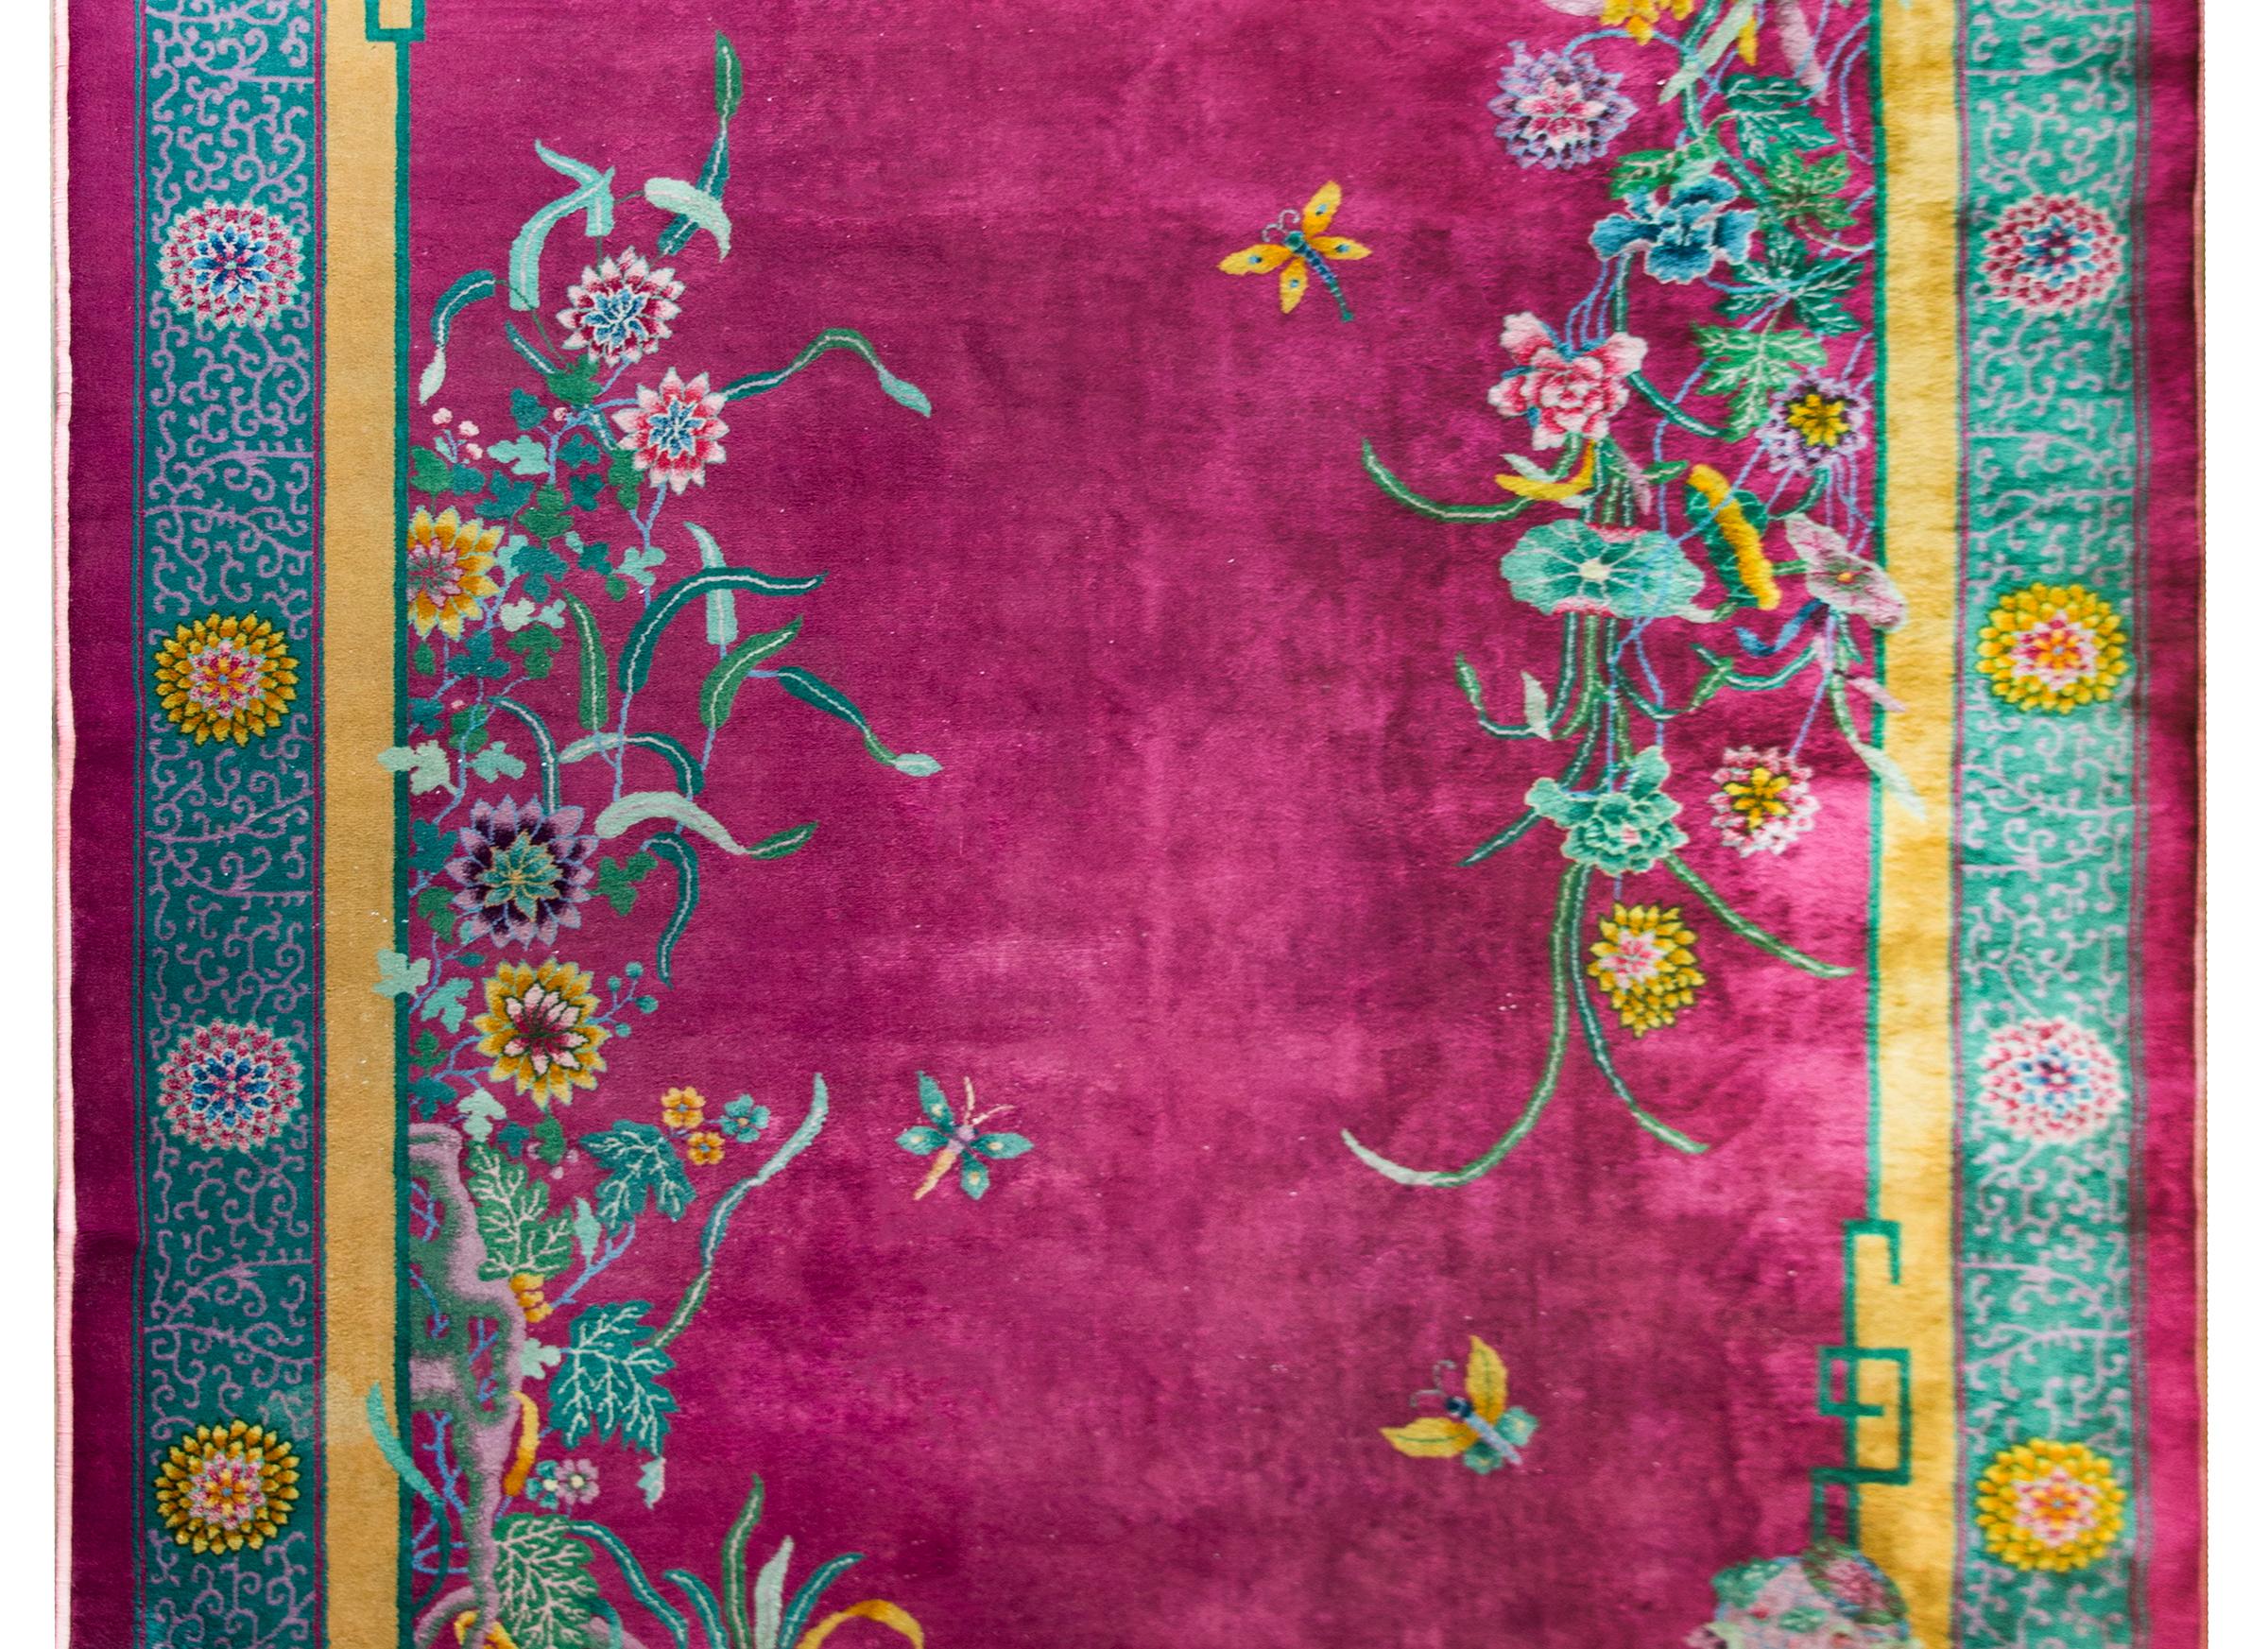 A beautiful early 20th century Chinese Art Deco rug with a brilliant fuchsia field surrounded by a border with large-scale chrystanthemum flowers amidst a tightly woven scrolling vine patterned field. More auspicious flowers overlay the field and